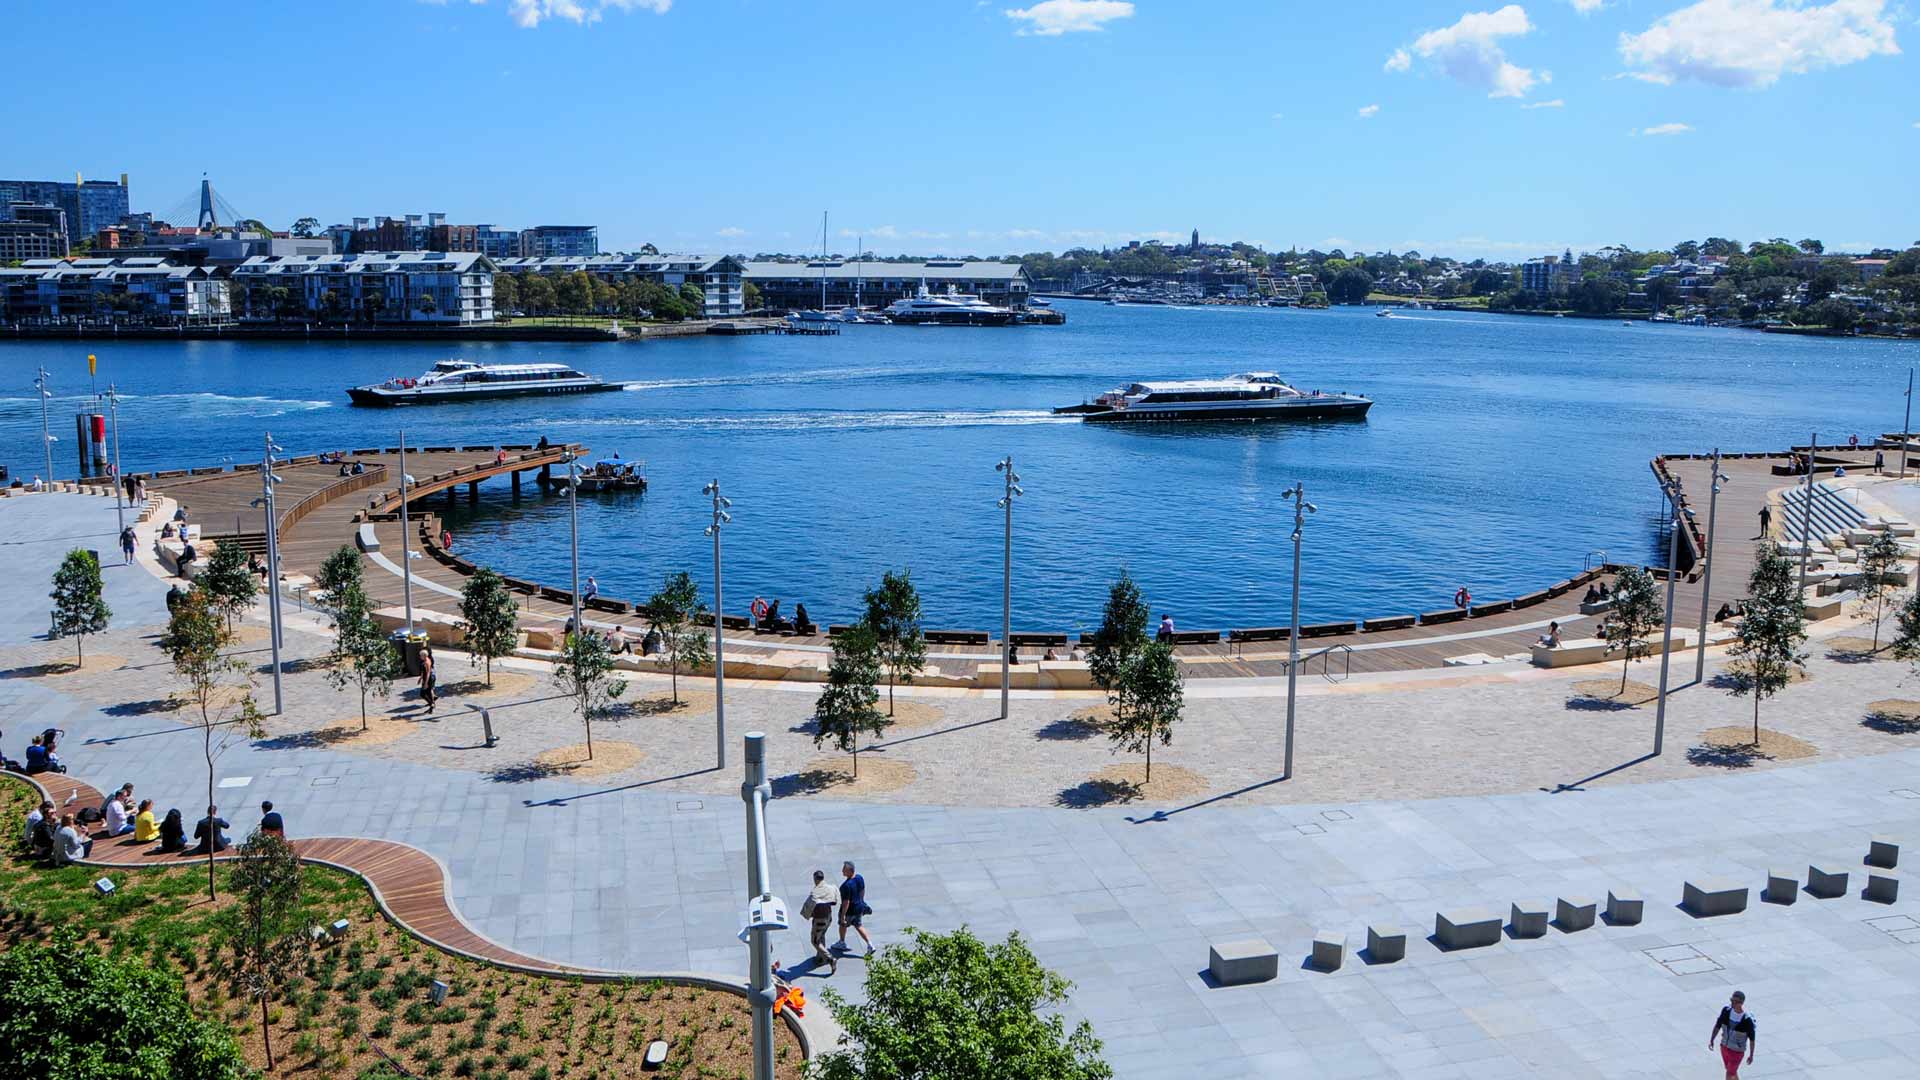 Barangaroo Is Now Home to a Massive Amphitheatre-Style Boardwalk on the Waterfront